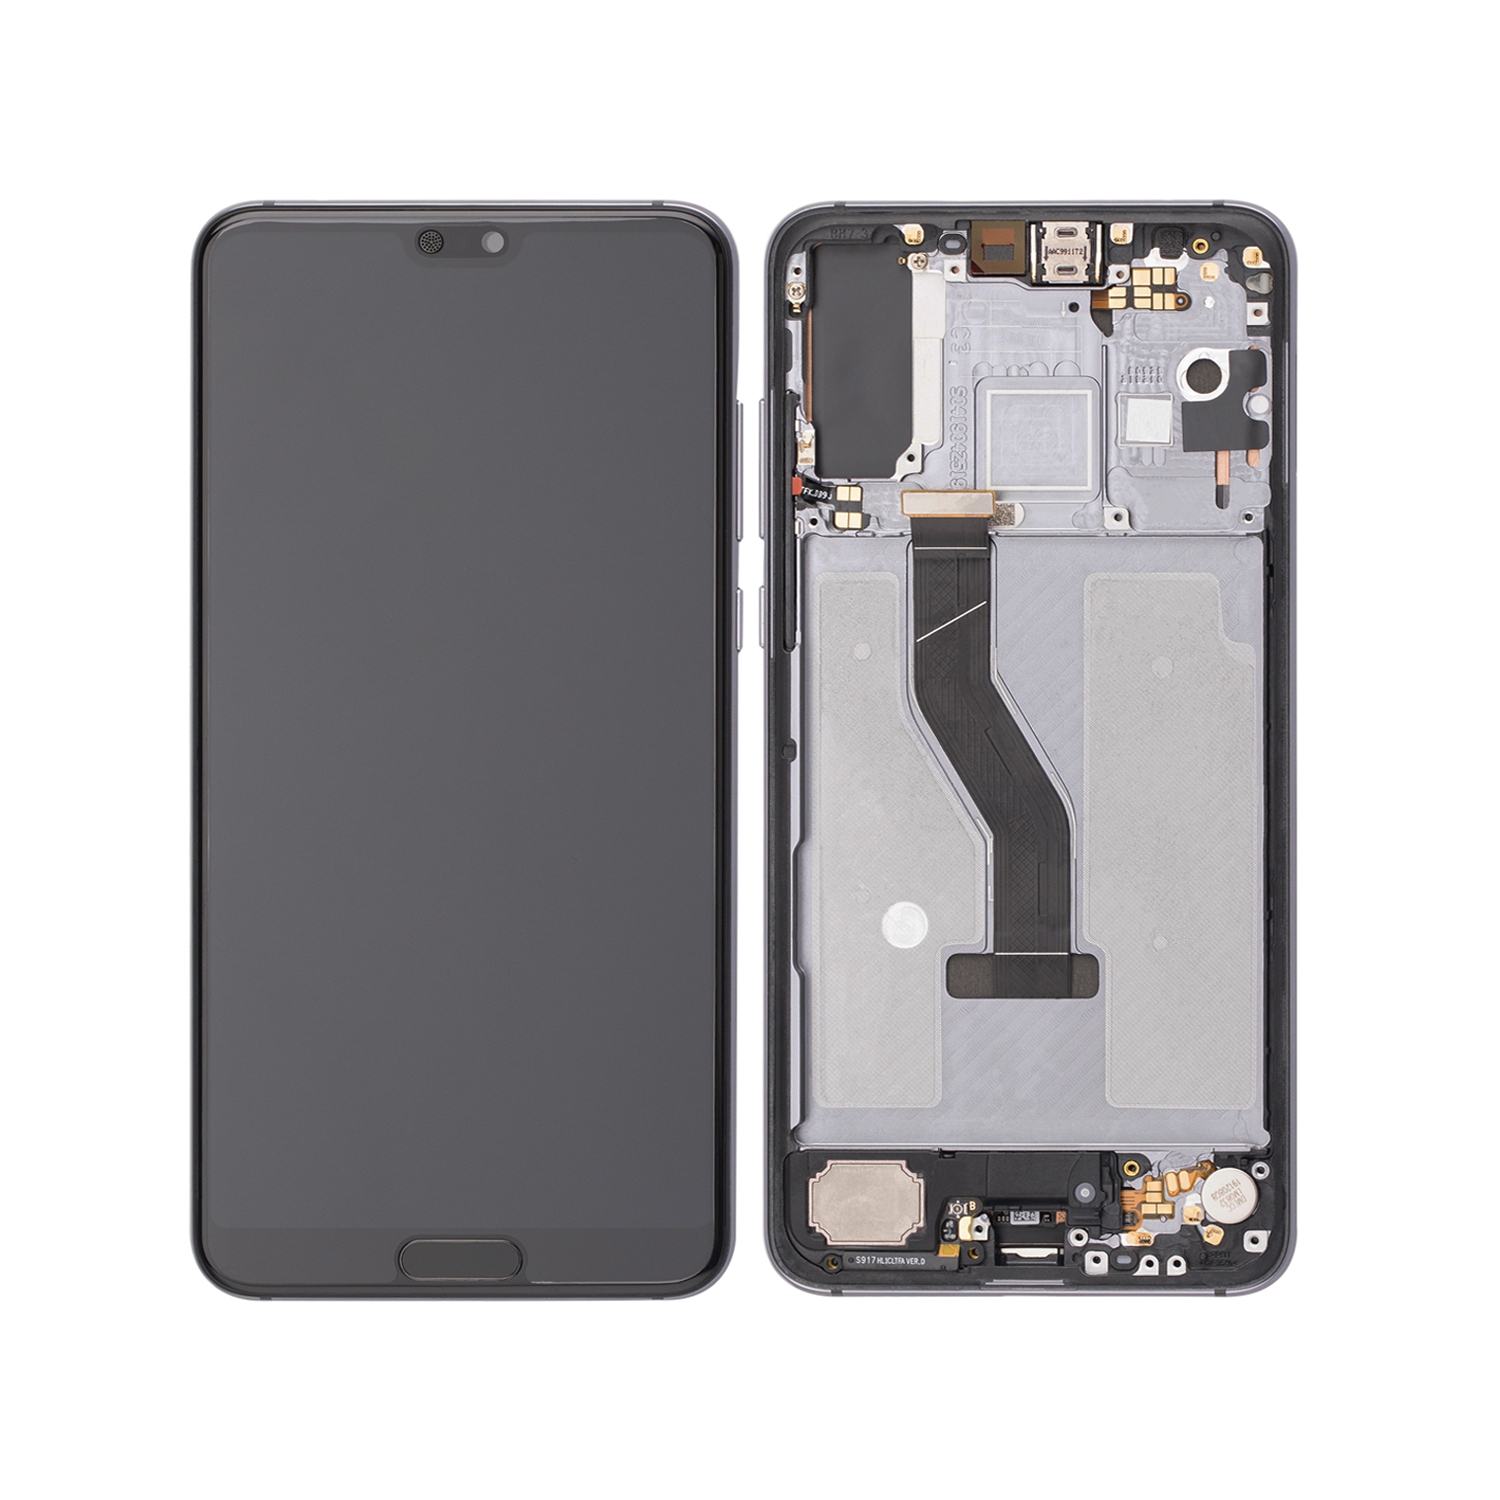 Replacement LCD Display Touch Screen Digitizer Assembly With Frame For Huawei P20 Pro - Black